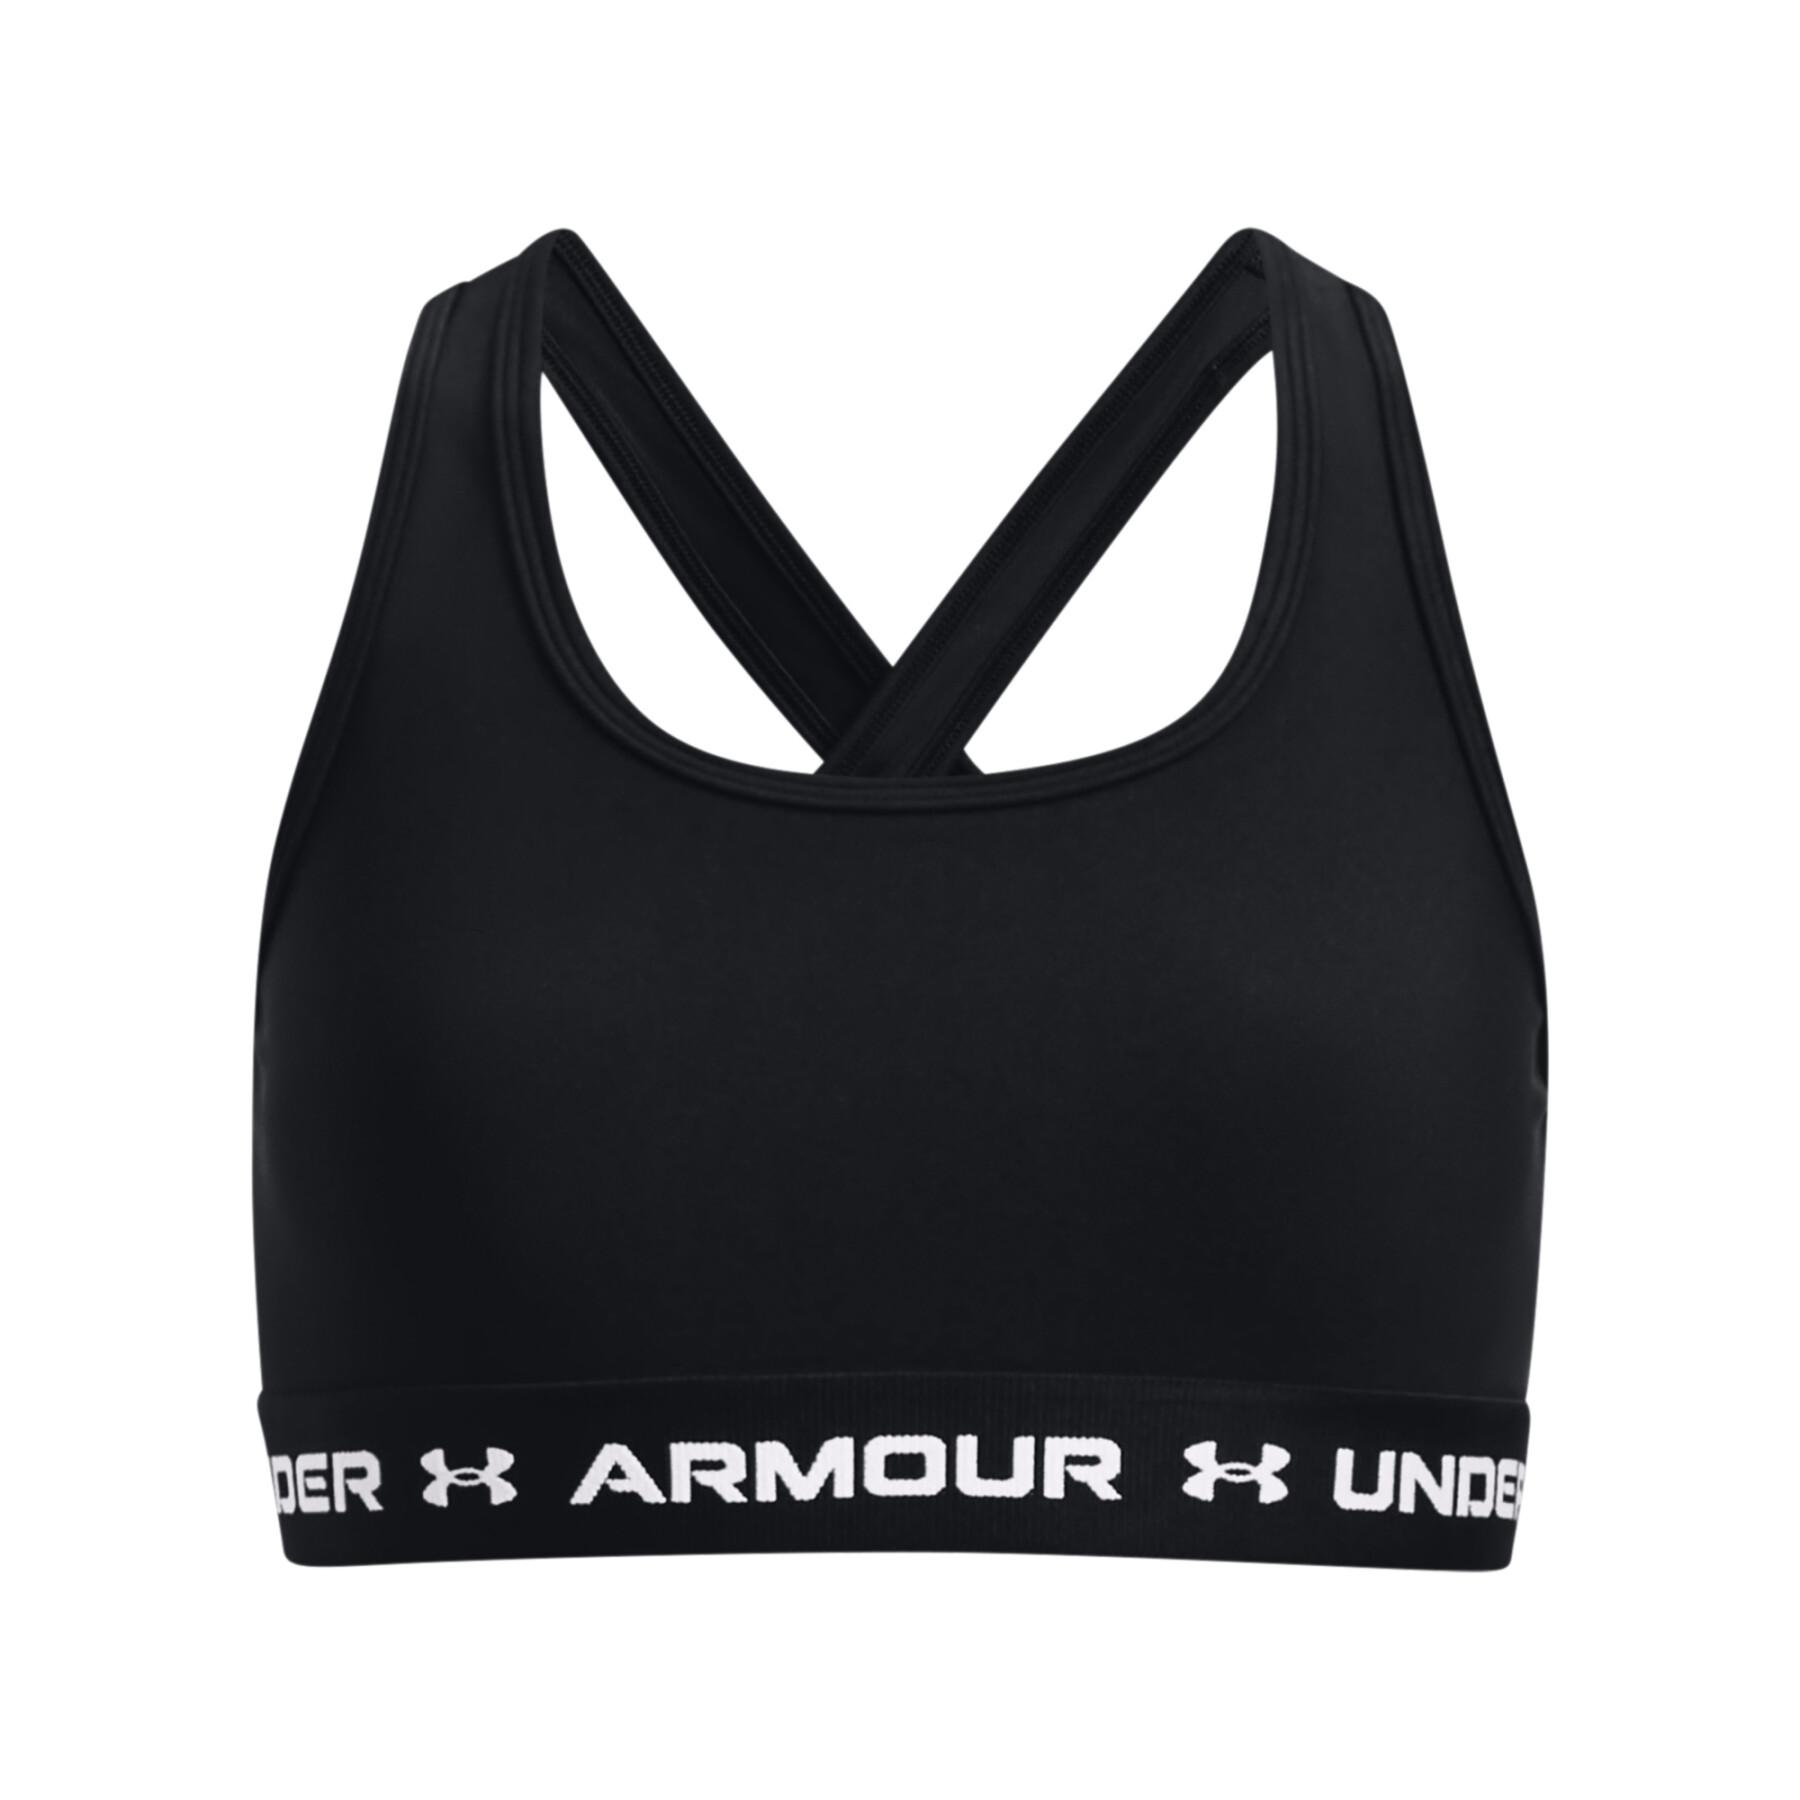 Plain bra with crossed straps and moderate support for girls Under Armour